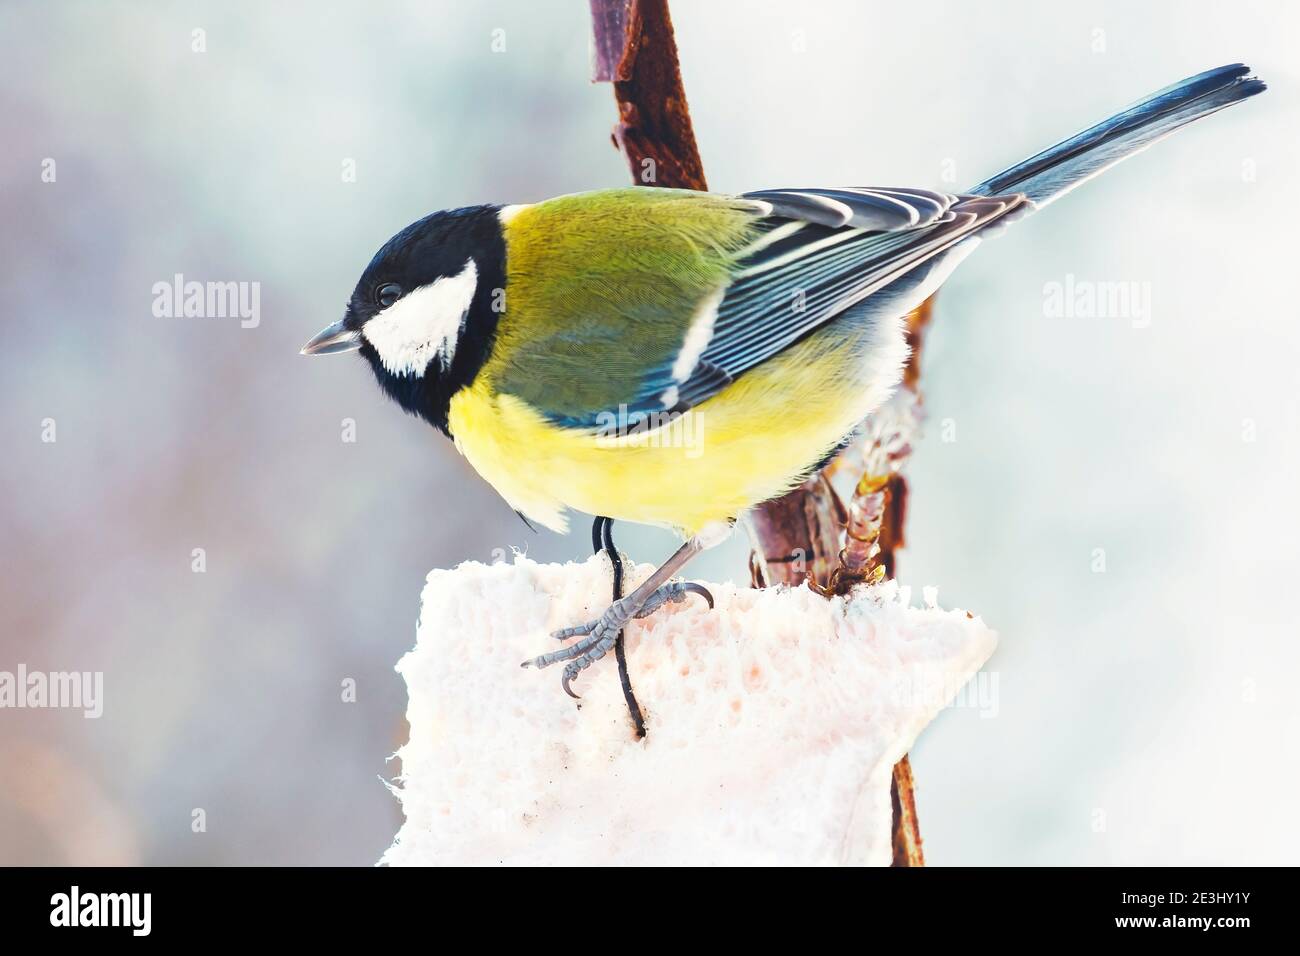 Great tit eating piece of lard hanging on tree branch in winter with blurred background Stock Photo